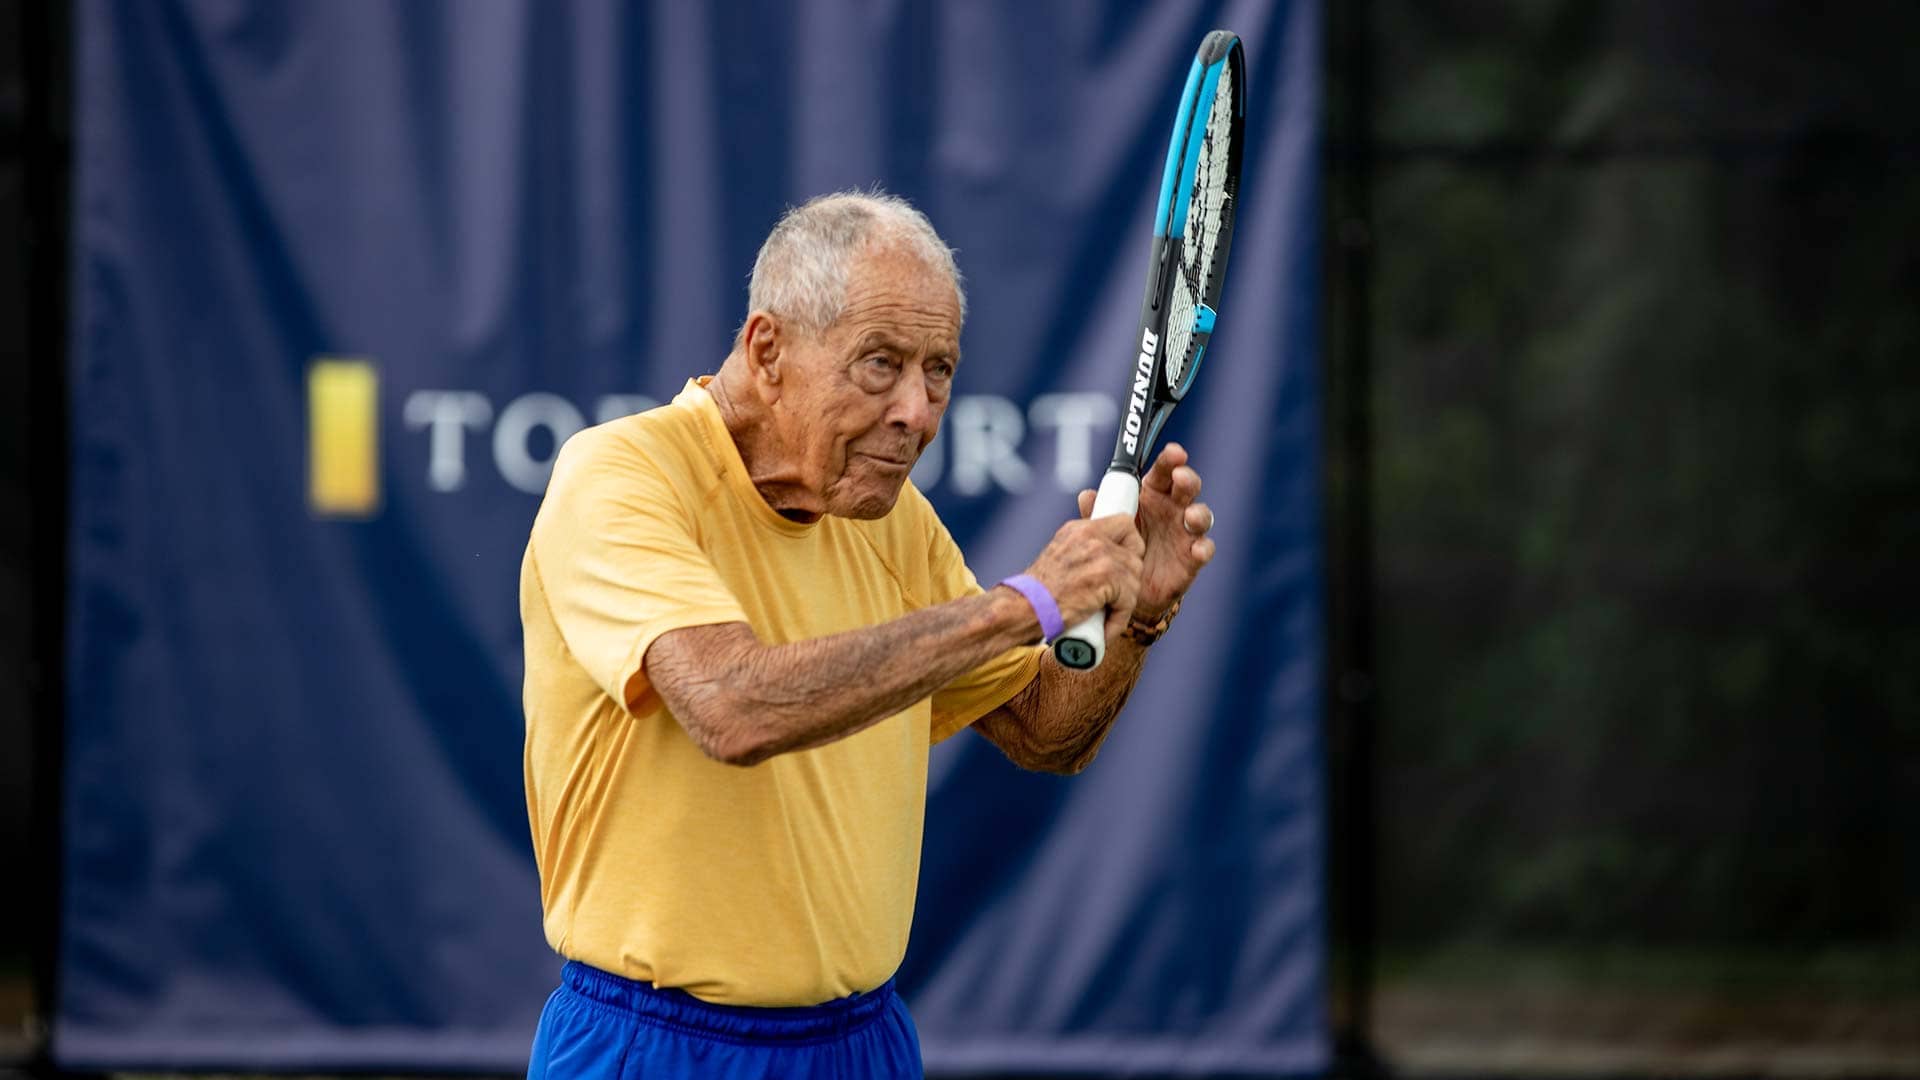 Nick Bollettieri brings over 60 years of coaching experience to his TopCourt class.